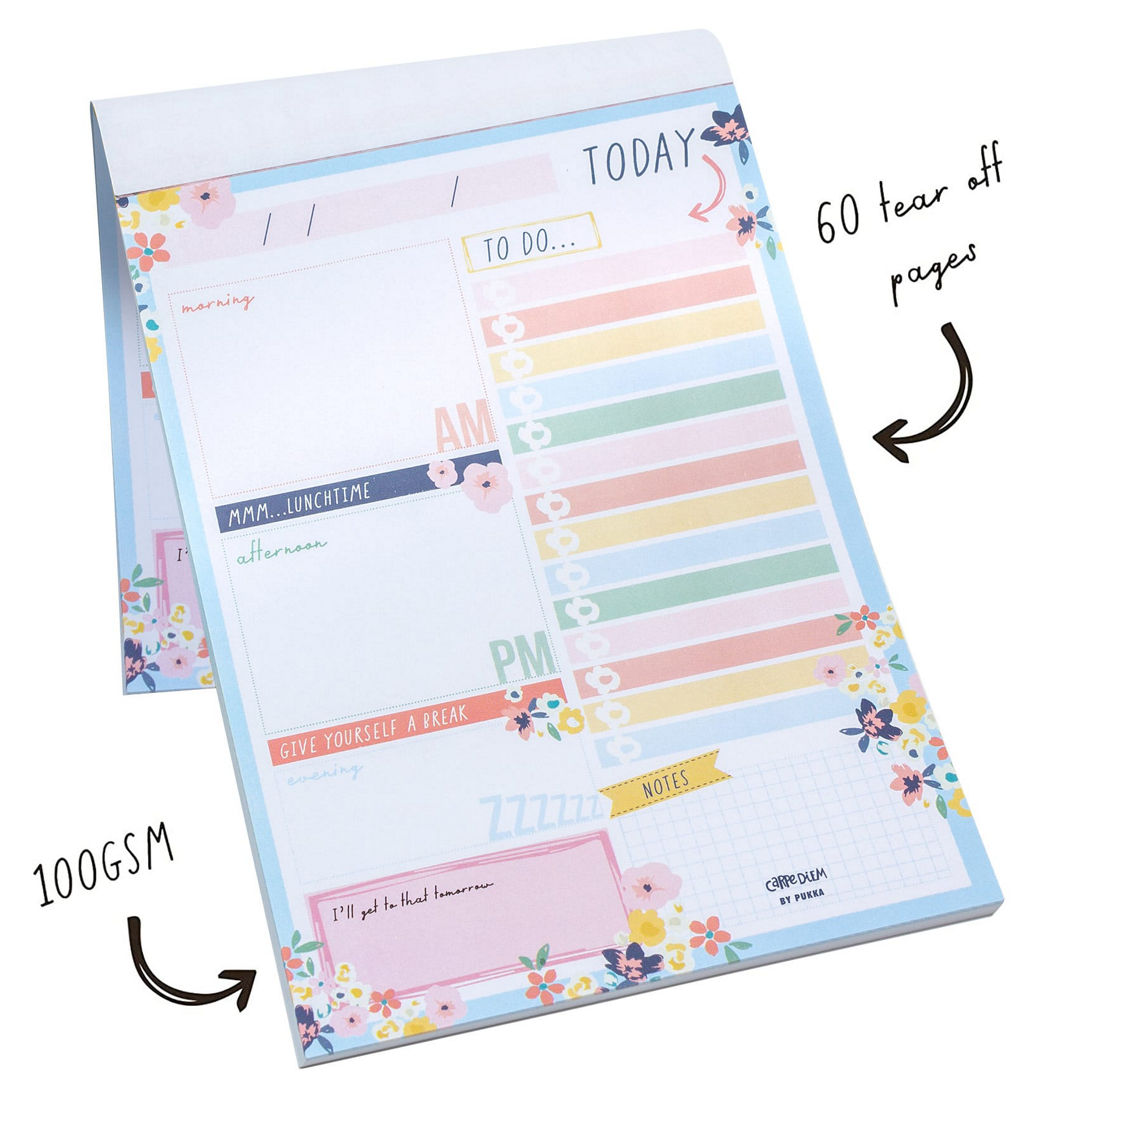 Pukka Pads Daily Planner Pad, Ditzy Floral, Pack 6 - Image 2 of 4